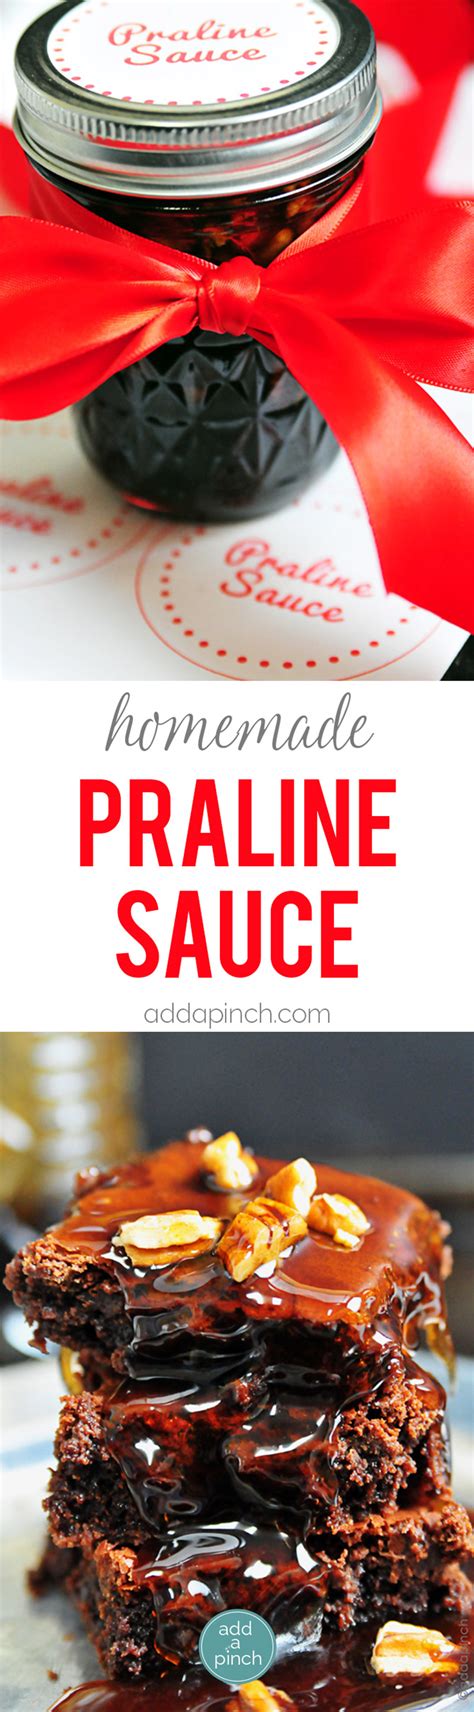 Praline Sauce Recipe Printable Cooking Add A Pinch Robyn Stone